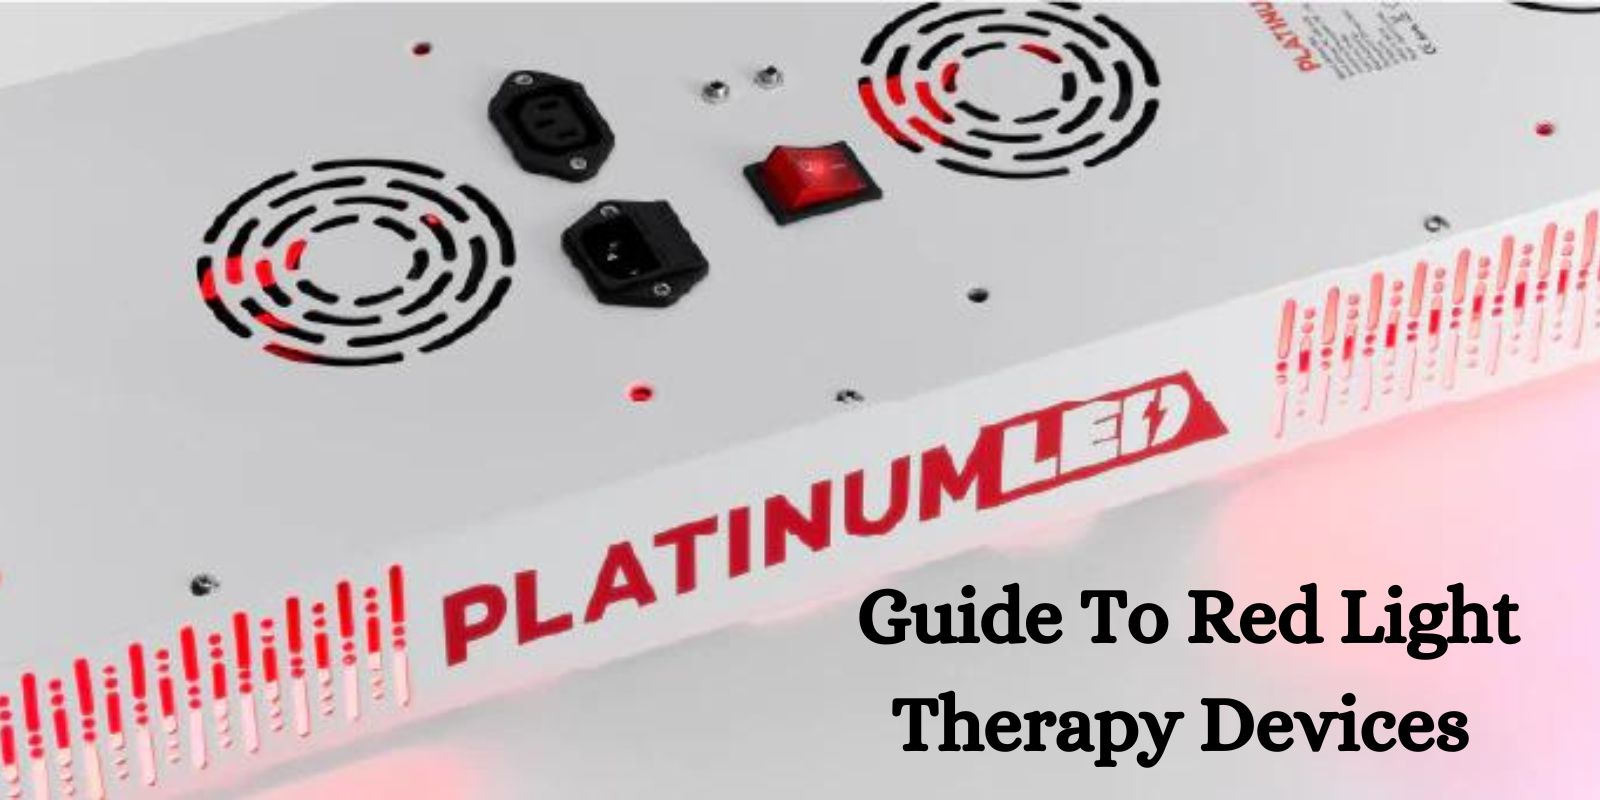 A Comprehensive Guide To Red Light Therapy Devices